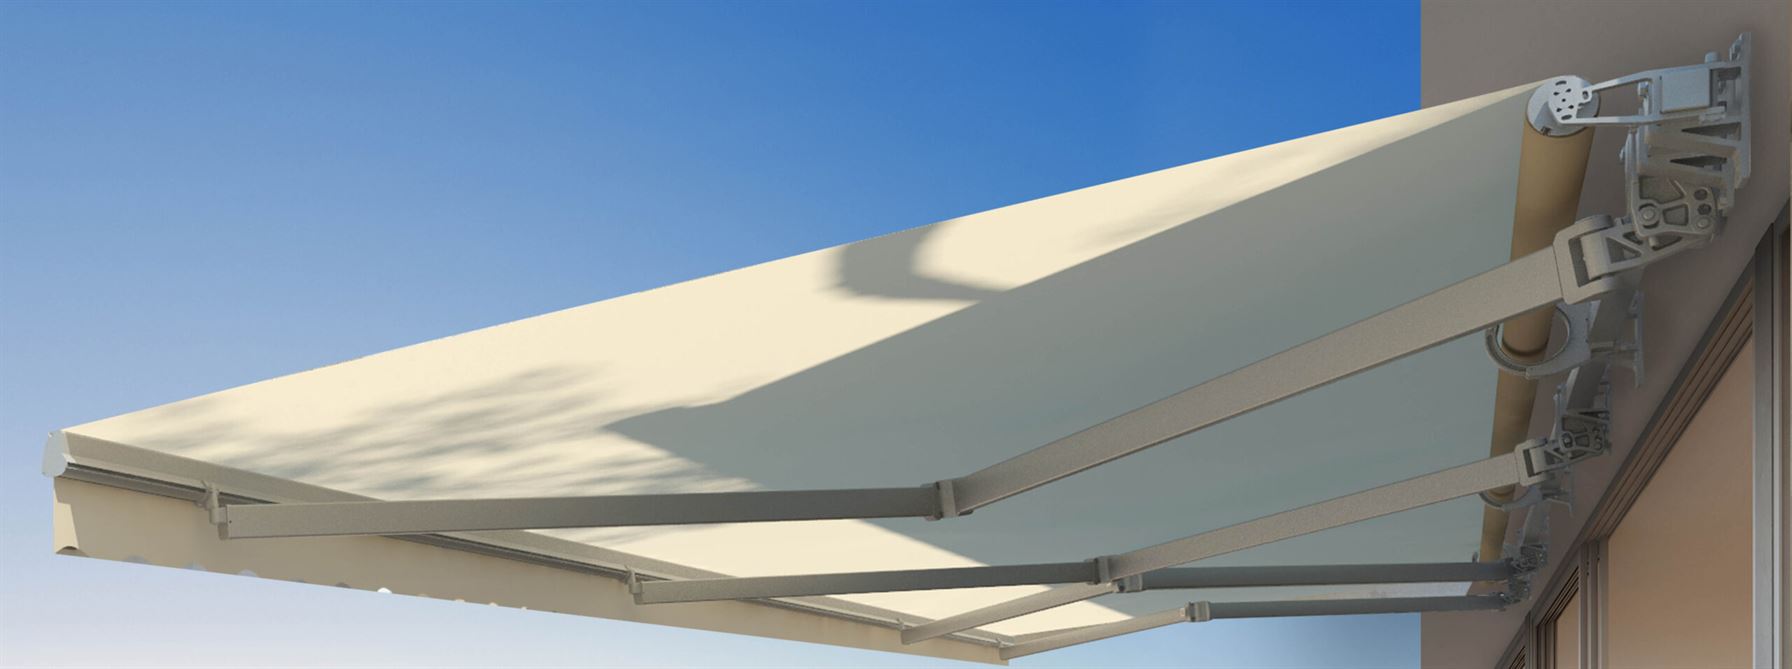 traditional awning system